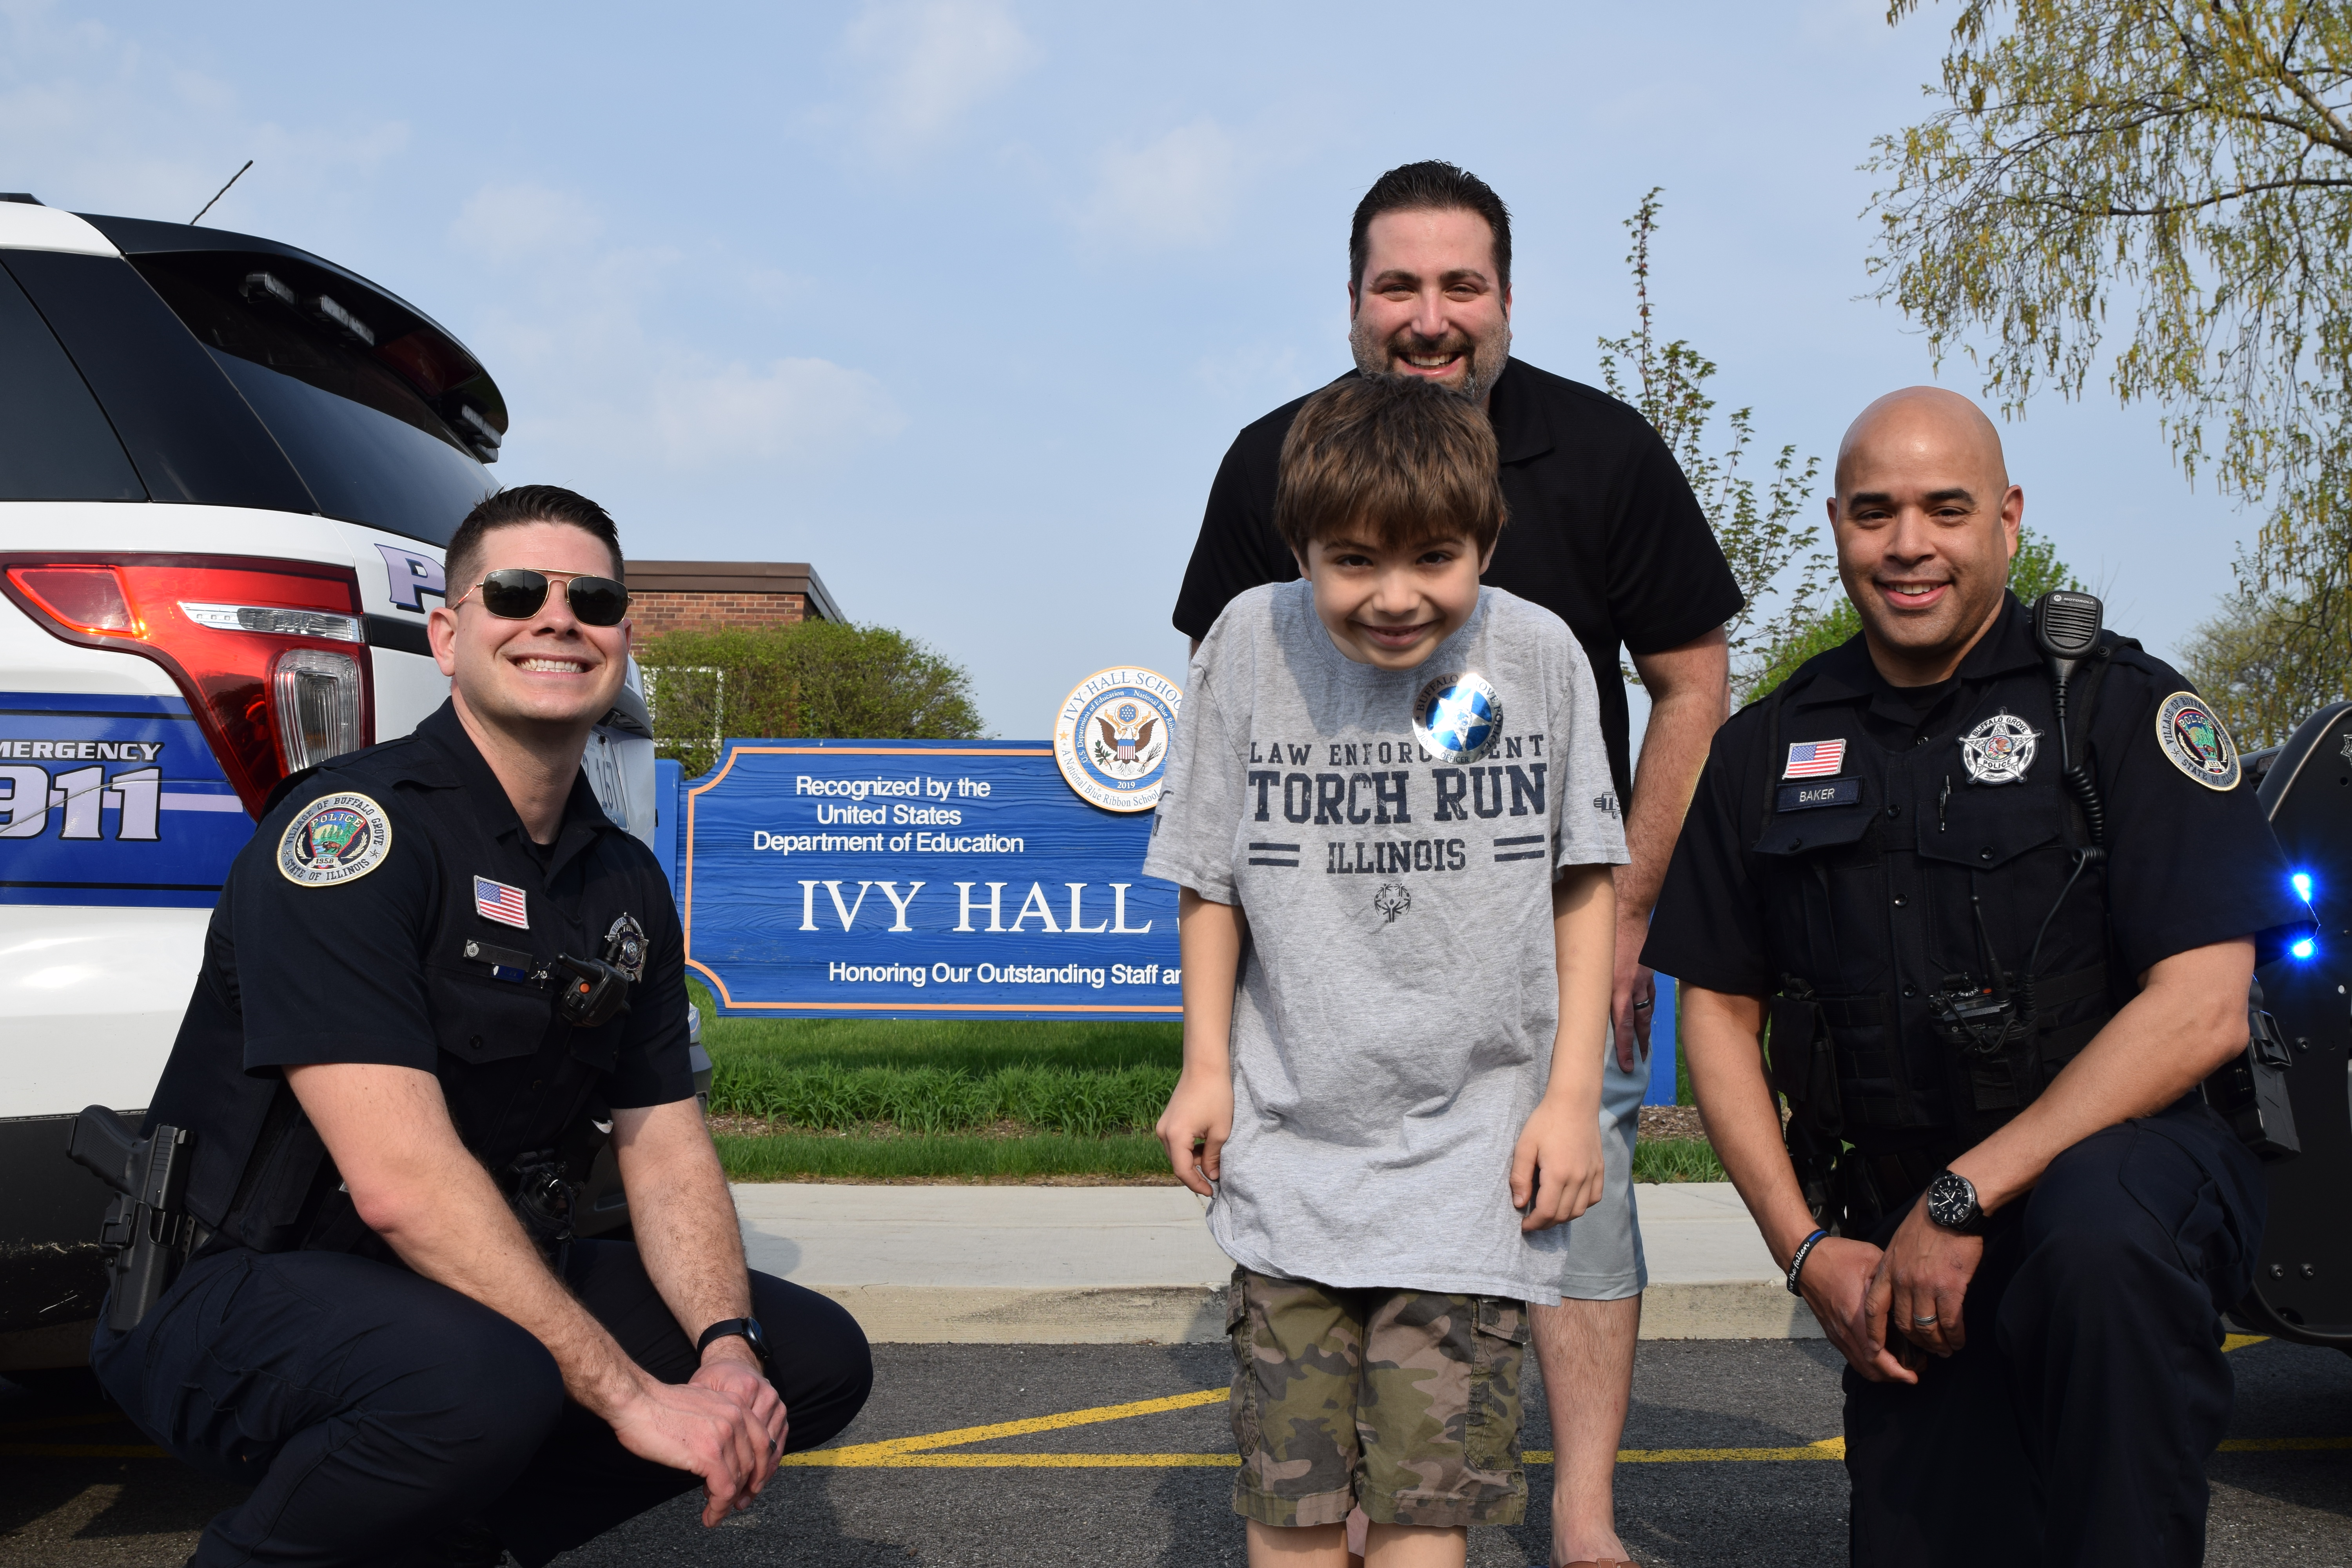 Ivy Hall Students Win Ride to School in Police Cruiser